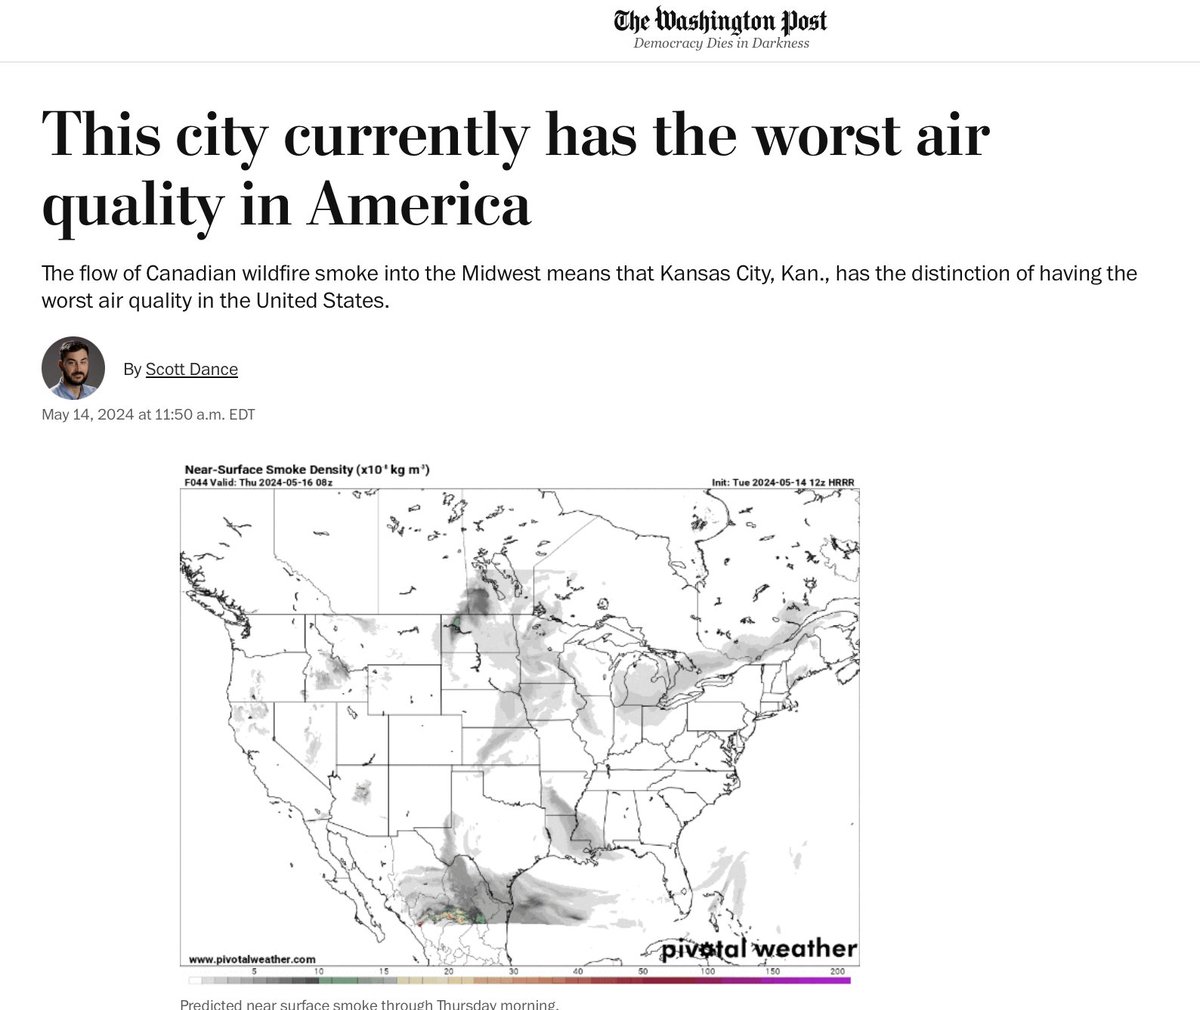 Kansas City, Kan. may have the 'worst air quality in the US' thanks to Canadian wildfires but the air is, at worst, just unpleasant, not dangerous -- not even for allegedly 'sensitive groups.' What's bad for one's health is being stressed out and scared by an irresponsible